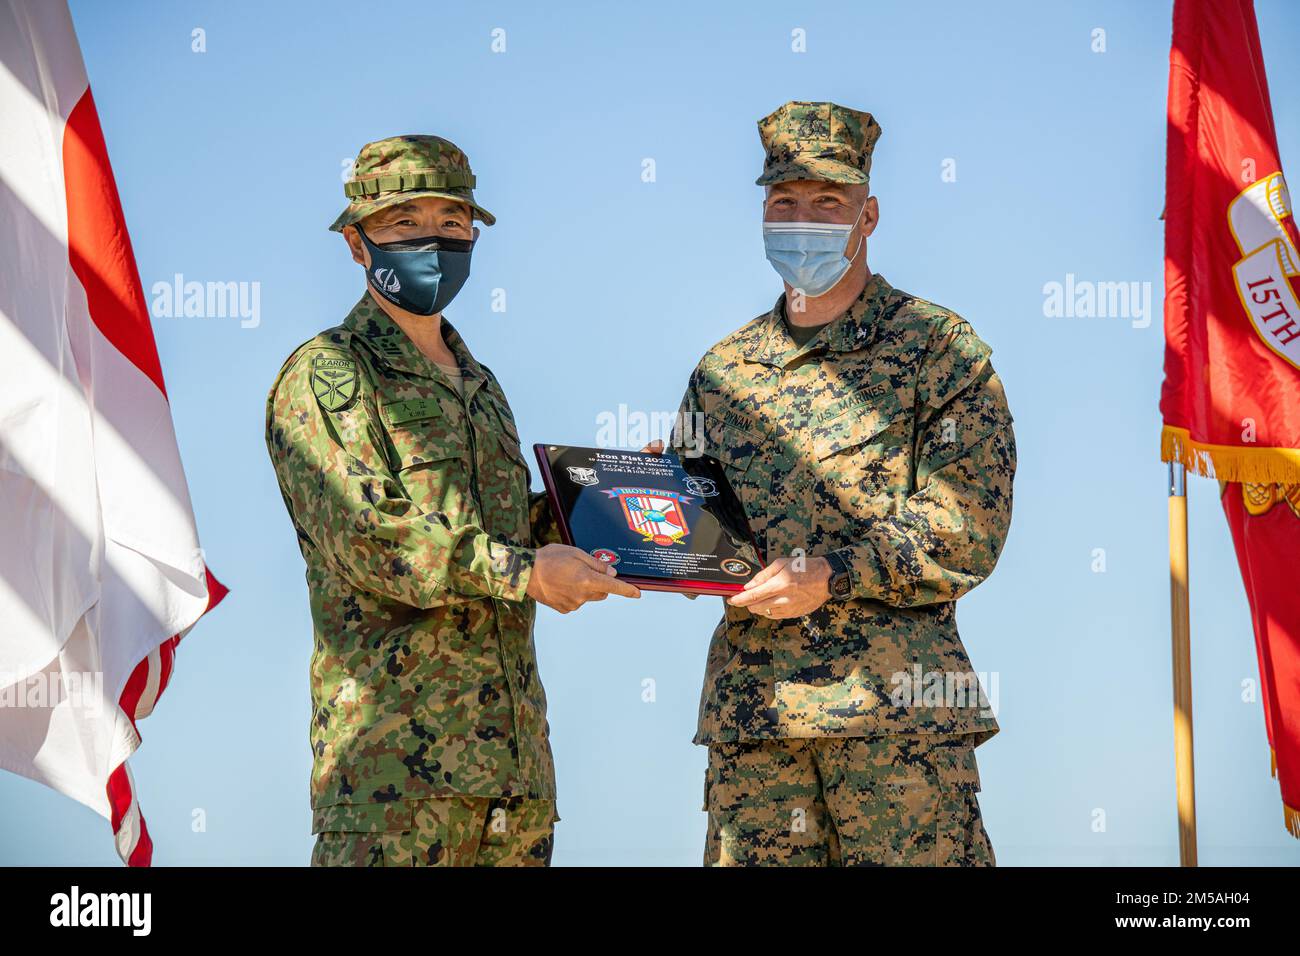 U.S. Marine Corps Col. Sean Dynan, commanding officer of the 15th Marine Expeditionary Unit, right, gifts a plaque in honor of exercise Iron Fist 2022 to Japan Ground Self-Defense Force (JGSDF) Col. Kazuhiro Irie, commanding officer of the 2nd Amphibious Rapid Deployment Regiment, during the closing ceremony of the exercise at Marine Corps Base Camp Pendleton, California, Feb. 16, 2022. For almost two decades the U.S. Marine Corps, U.S. Navy, and JGSDF have conducted exercise Iron Fist, training together in amphibious operations and affirming the U.S. commitment to our allies. Stock Photo